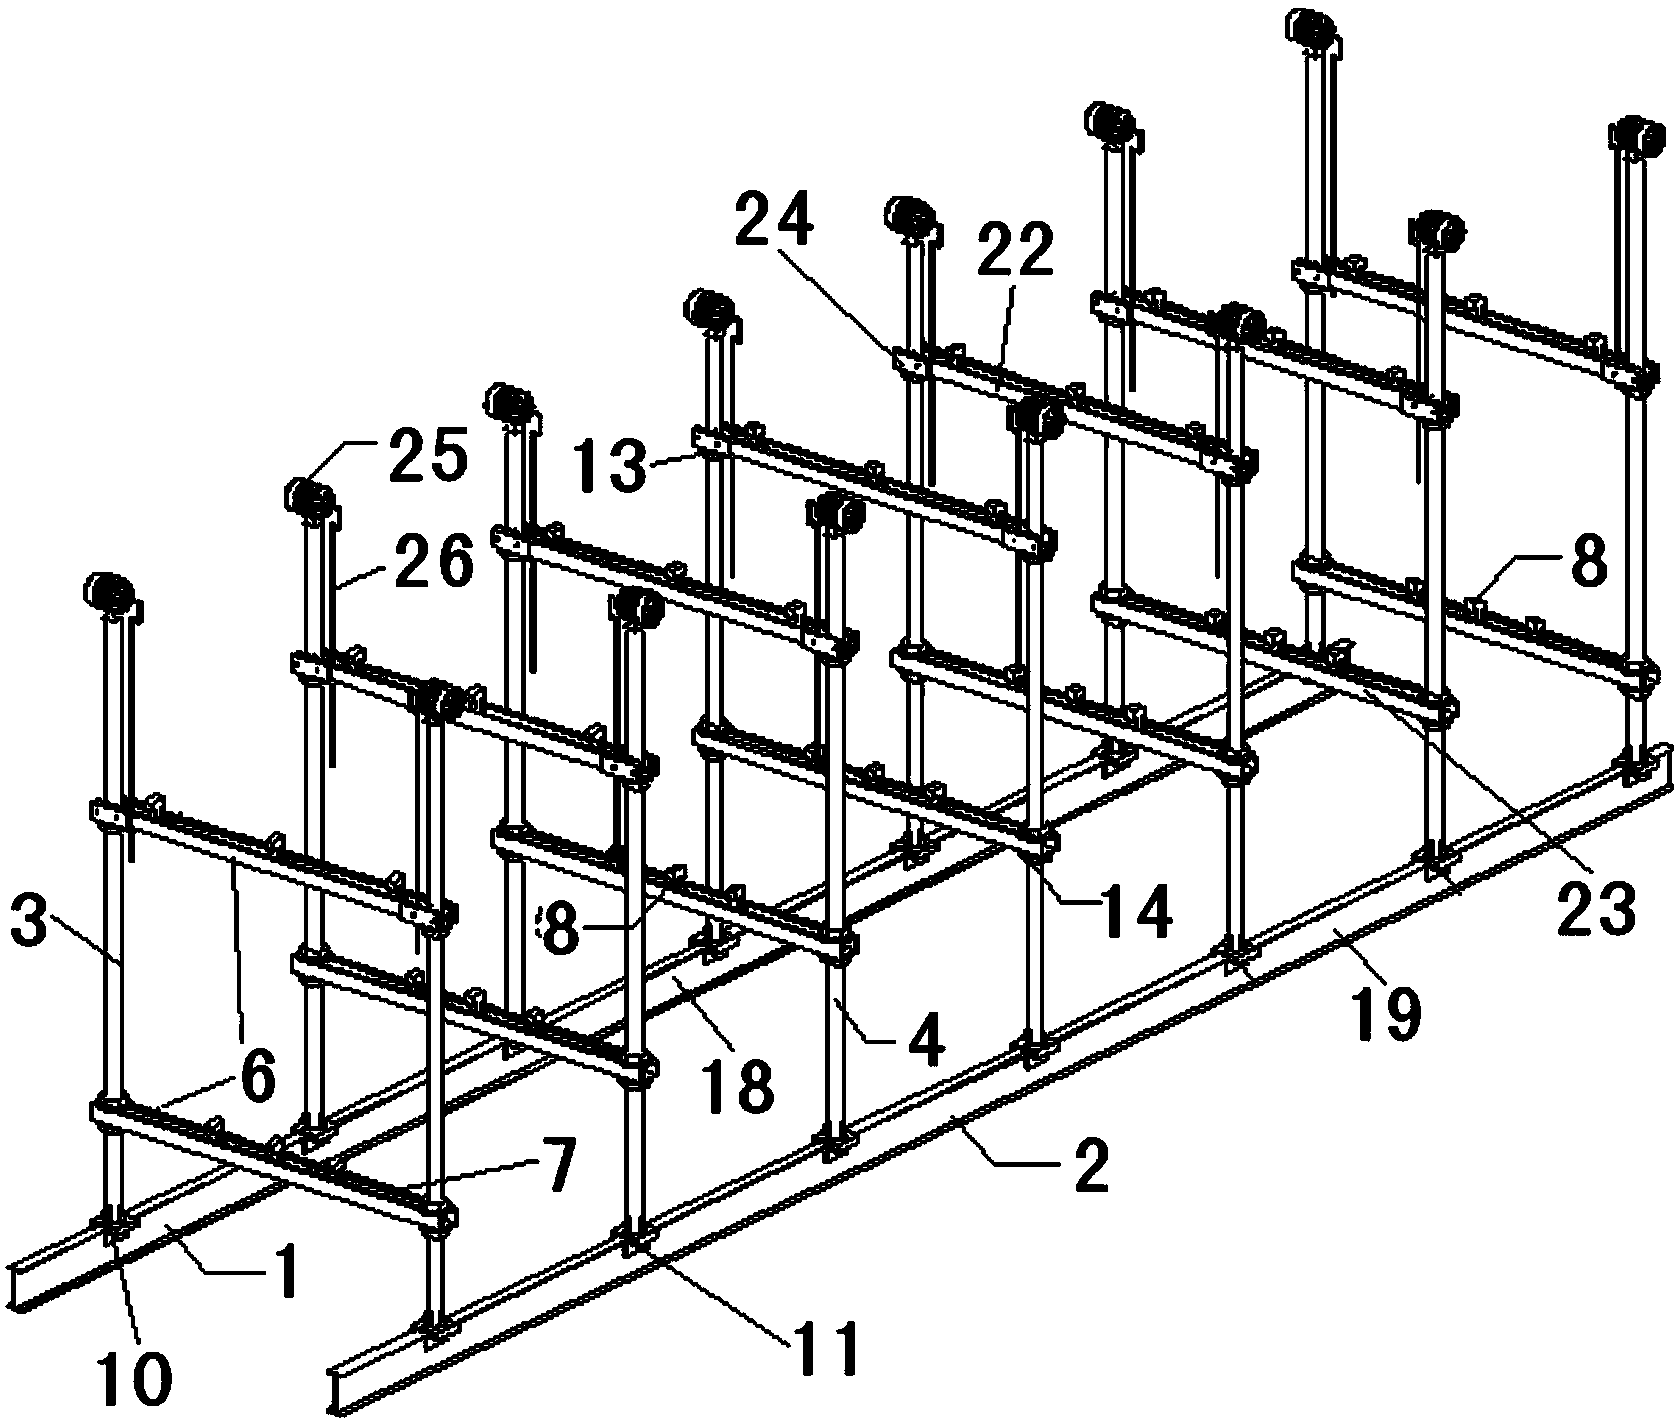 Jig frame structure for truss assembling and method for assembling truss with jig frame structure